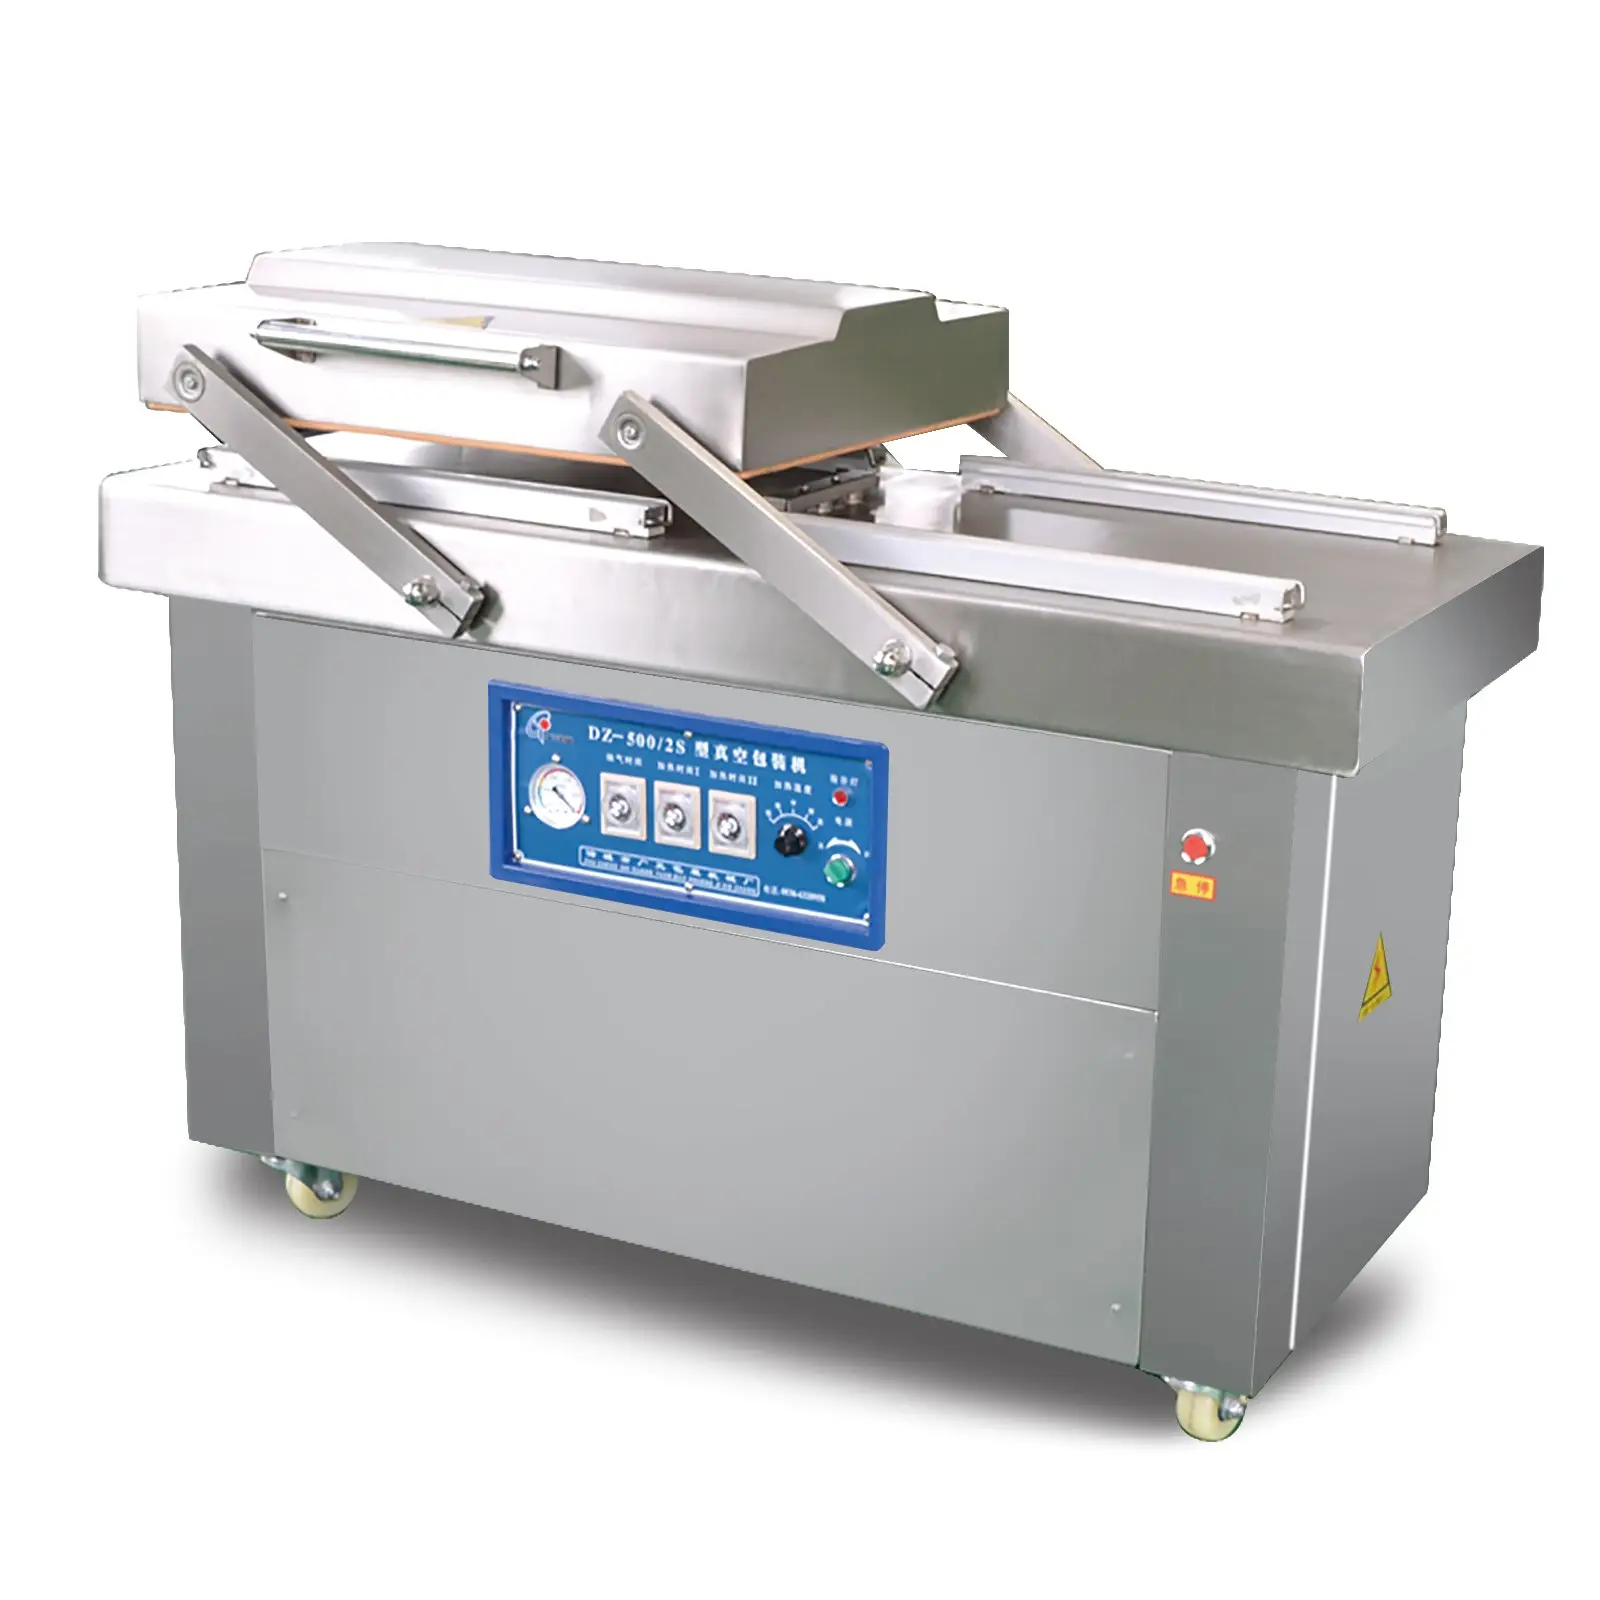 Industrial Double Chamber Vacuum Sealer Commercial Food Meat Vaccum Packing Sealing Machine DZ400/2S